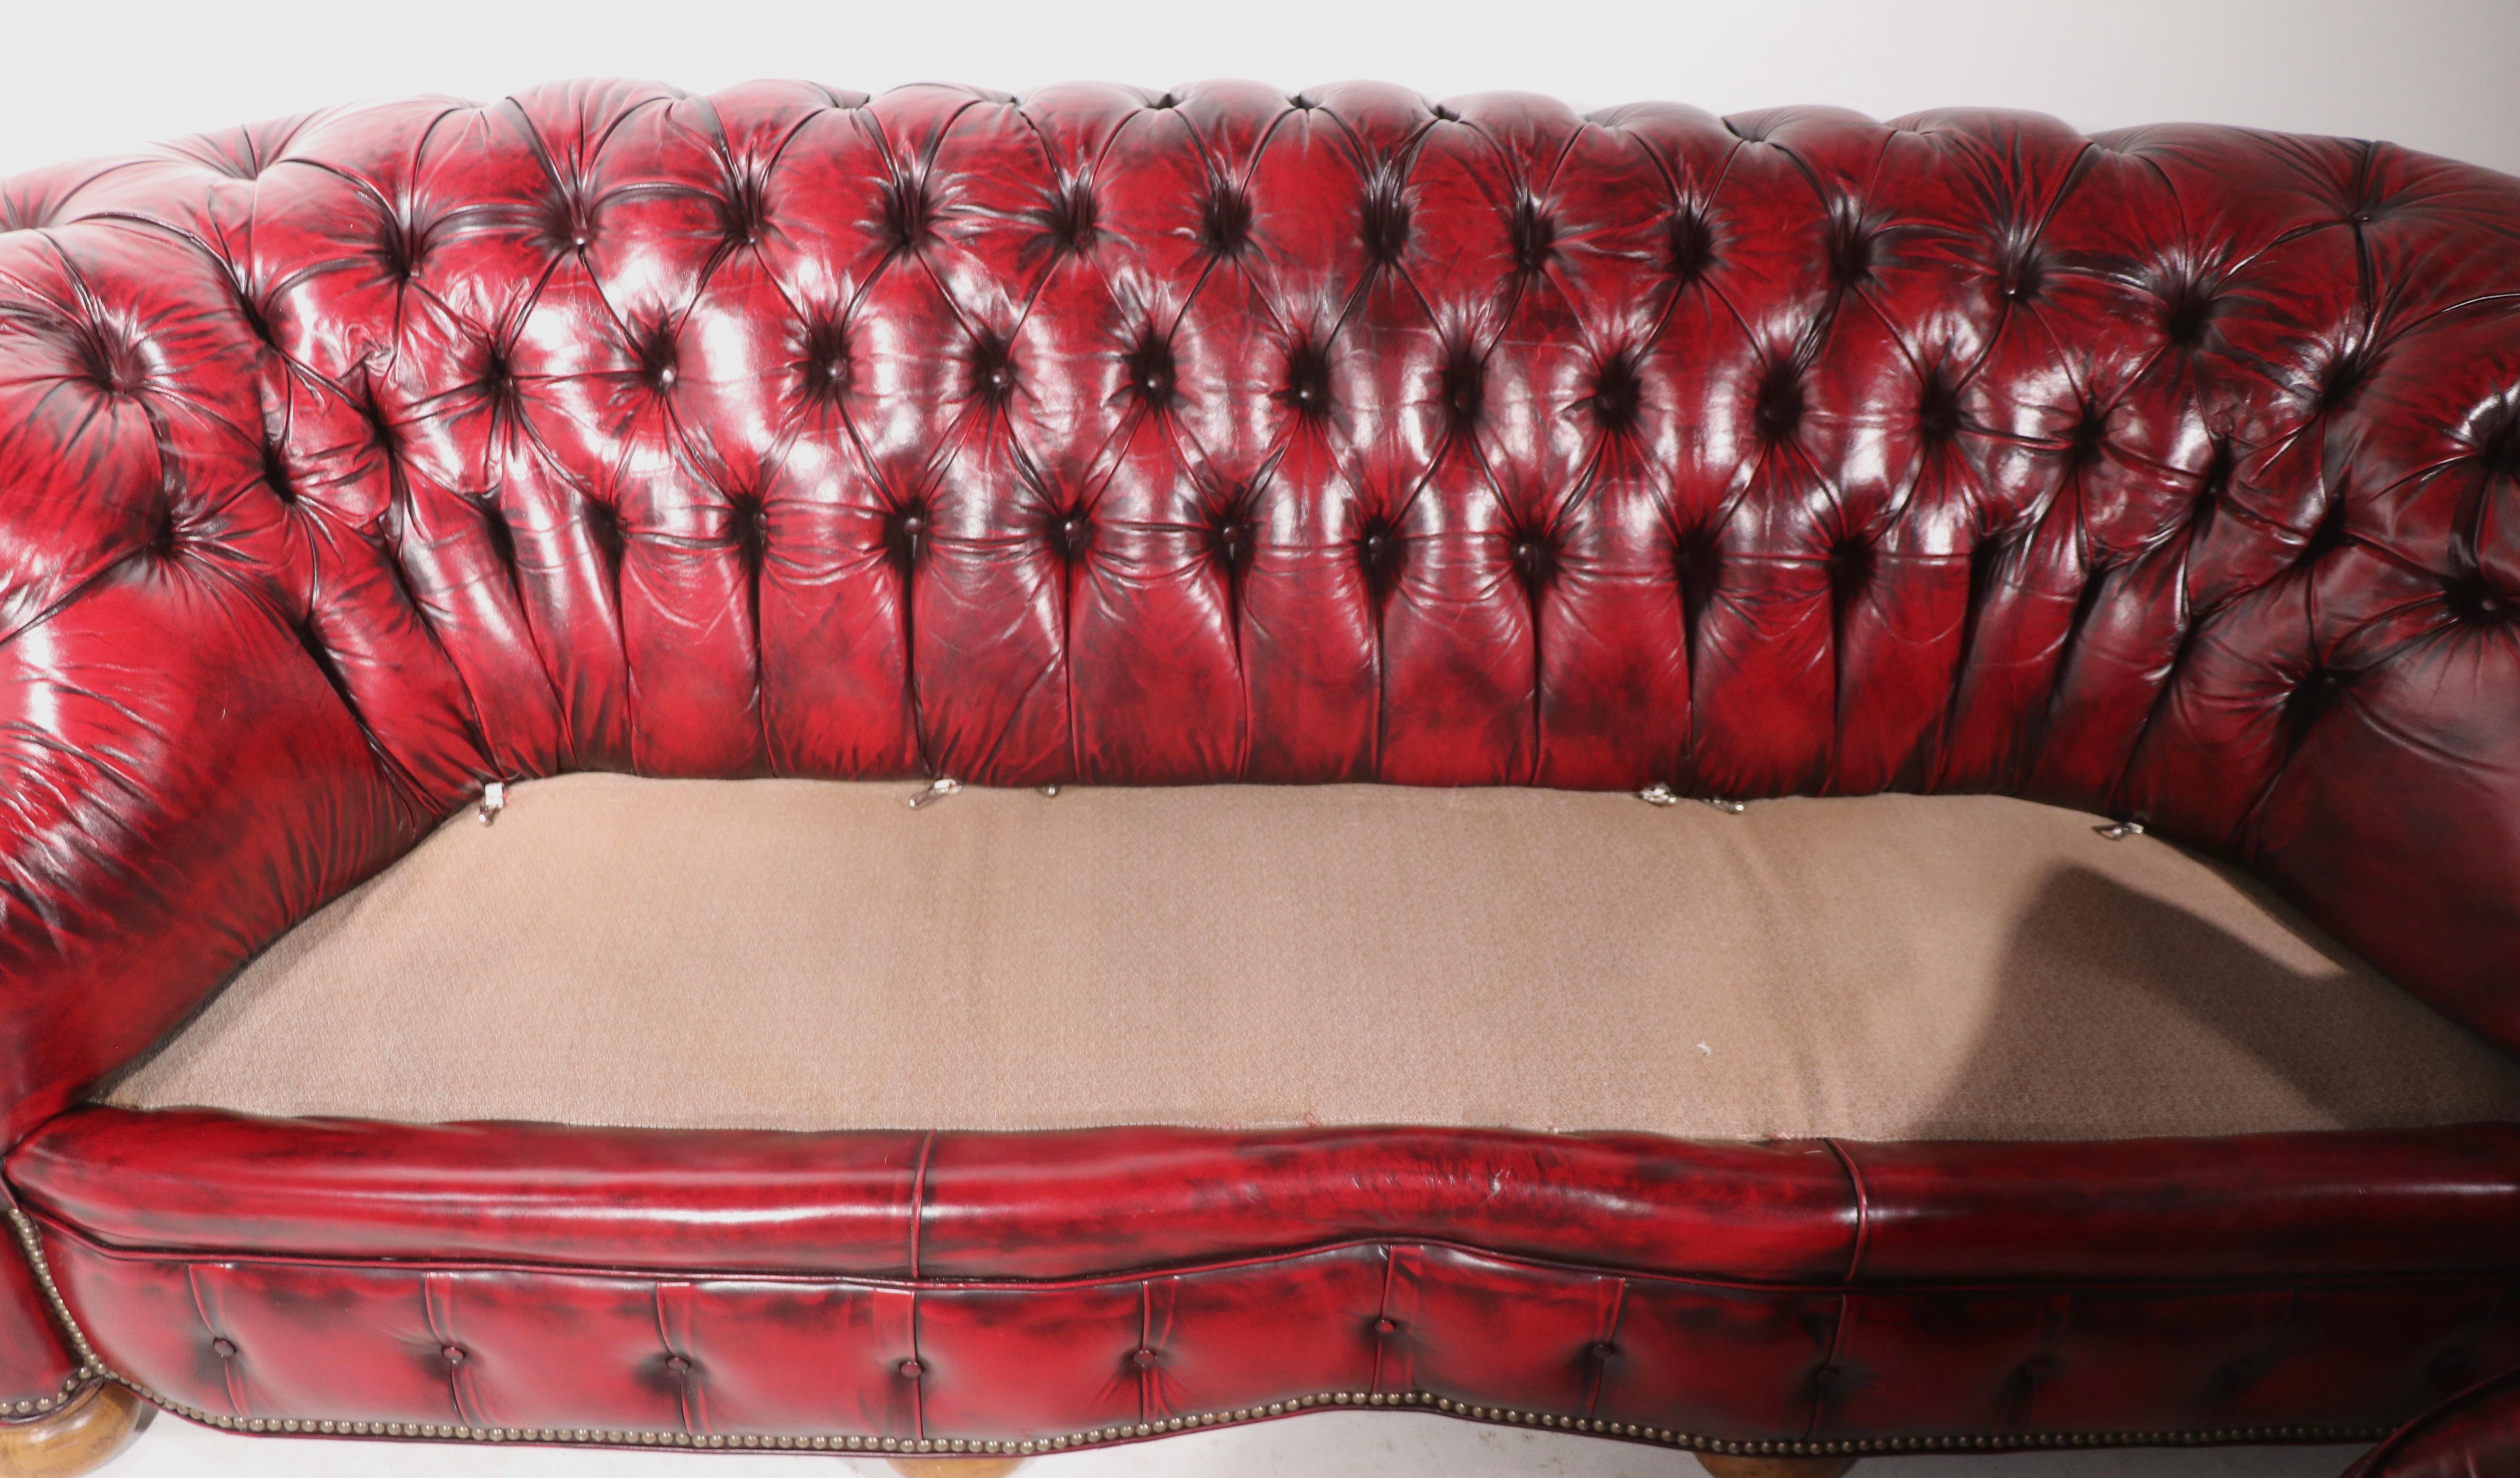 Phenomenal pair of Chesterfield sofas, having fully tufted upholstery, brass stud trim, tied spring construction and down filled seat cushions. Top quality materials, construction, both are in very fine, original clean and ready to use